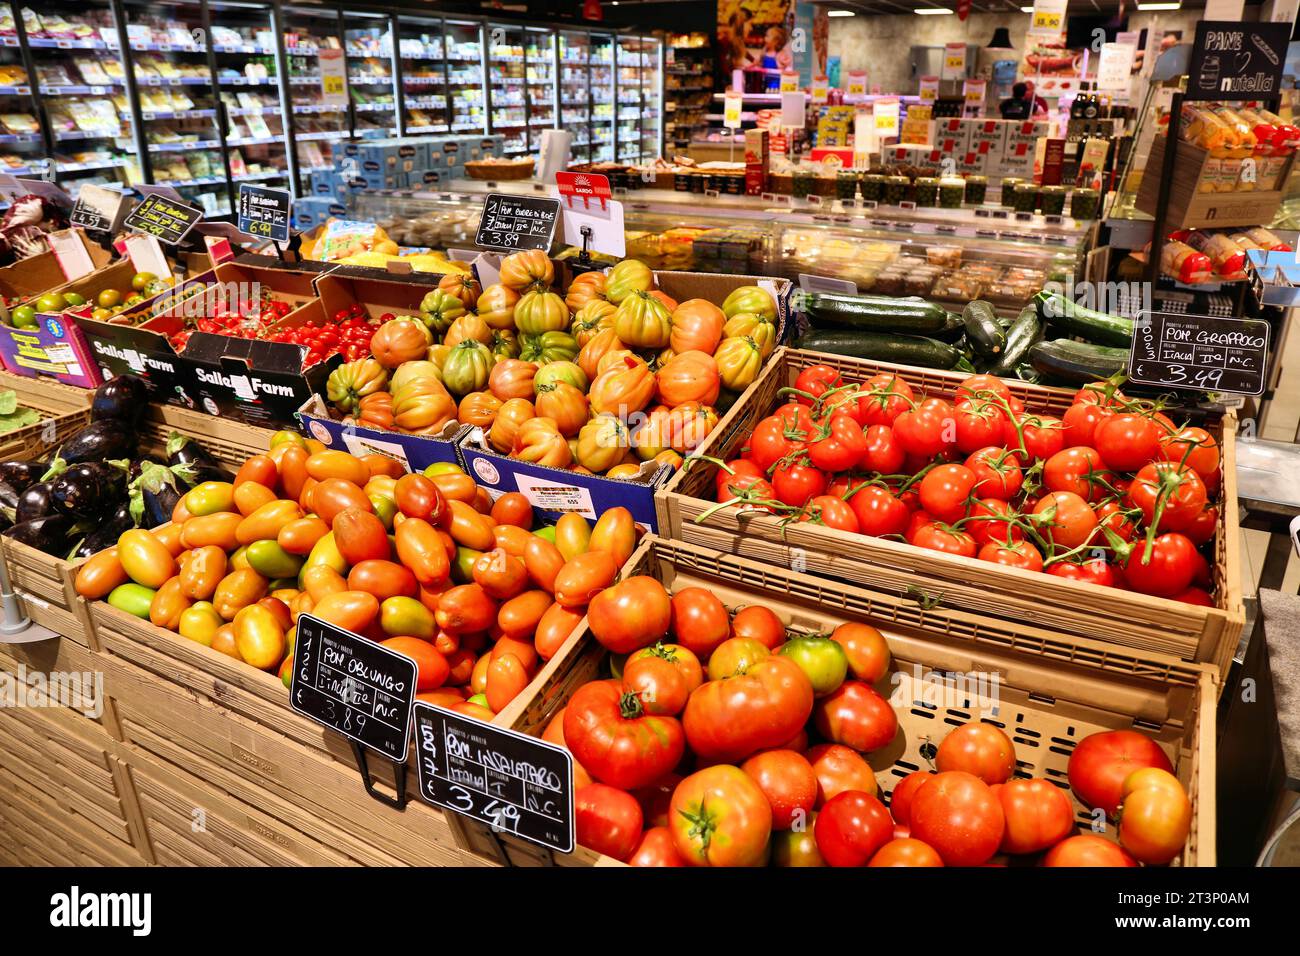 https://c8.alamy.com/comp/2T3P0AM/sardinia-italy-may-25-2023-fresh-produce-aisle-with-different-tomato-varieties-in-a-supermarket-in-sardinia-island-italy-2T3P0AM.jpg